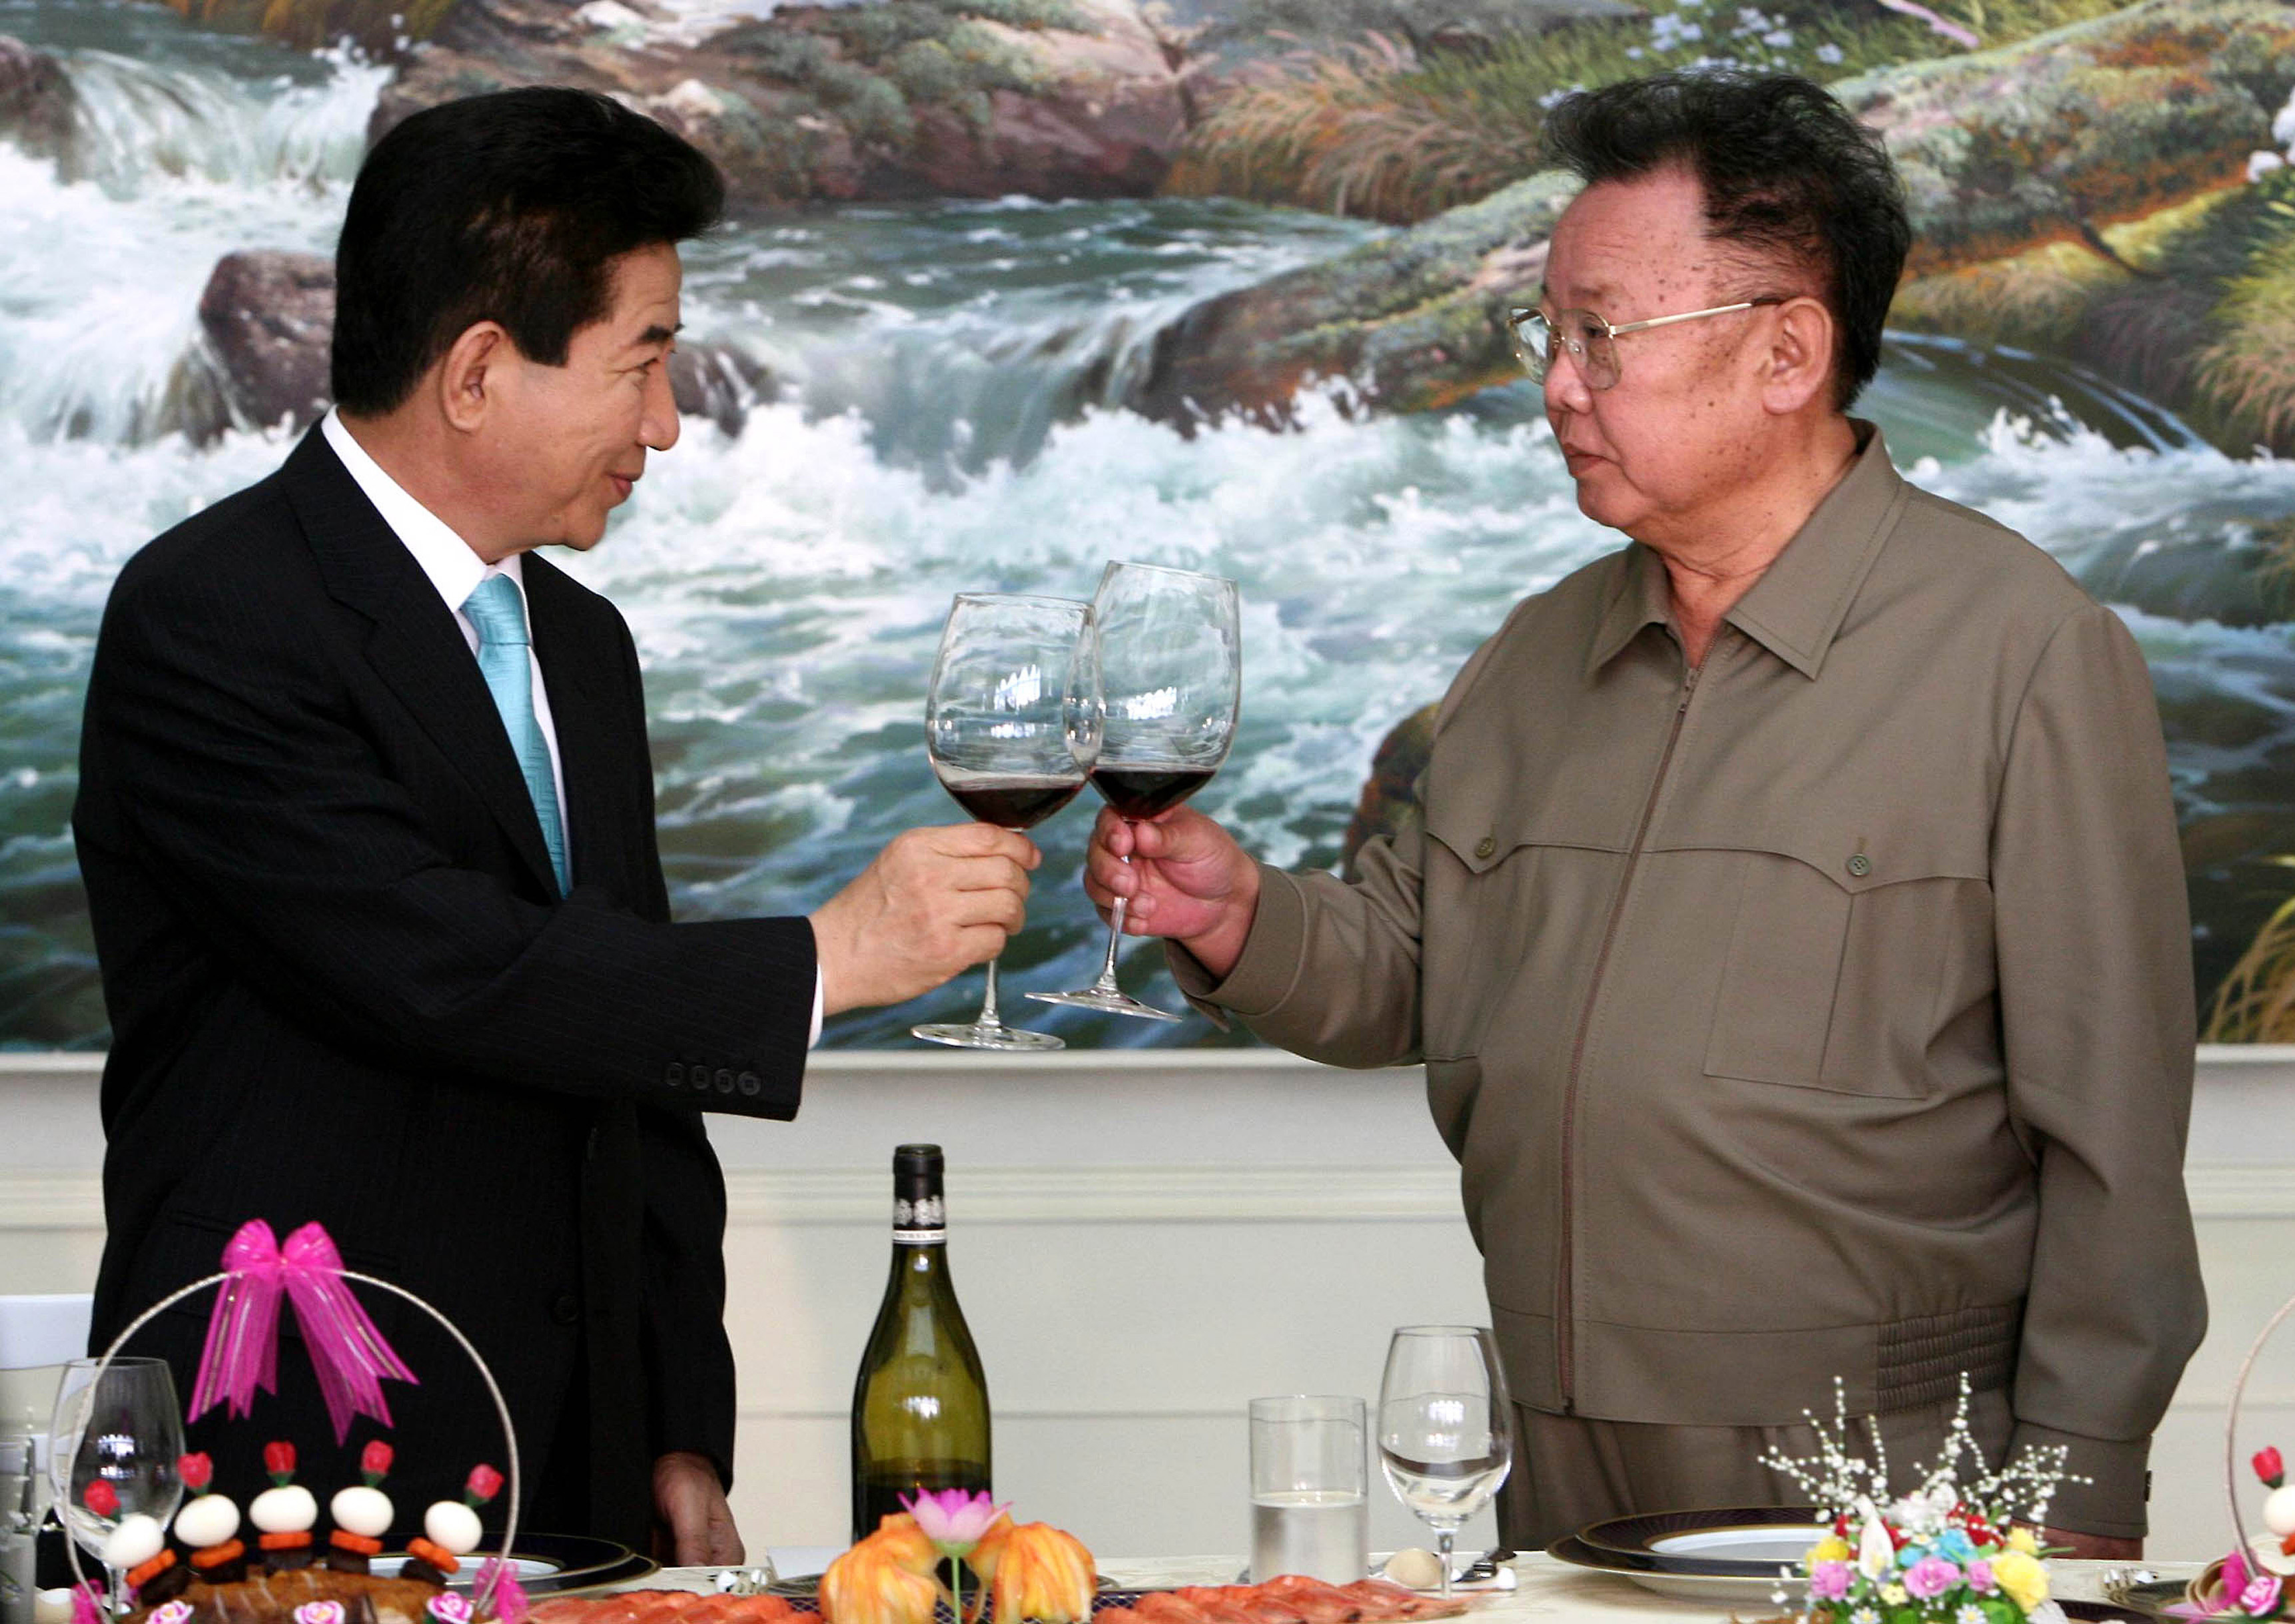 North Korean Leader Kim Jong-Il and South Korean President Roh Moo-Hyun (L) toast during a luncheon hosted by Kim for the inter-Korea Summit in Pyongyang, North Korea,on Oct. 4, 2007. (STR—AFP/Getty Images)